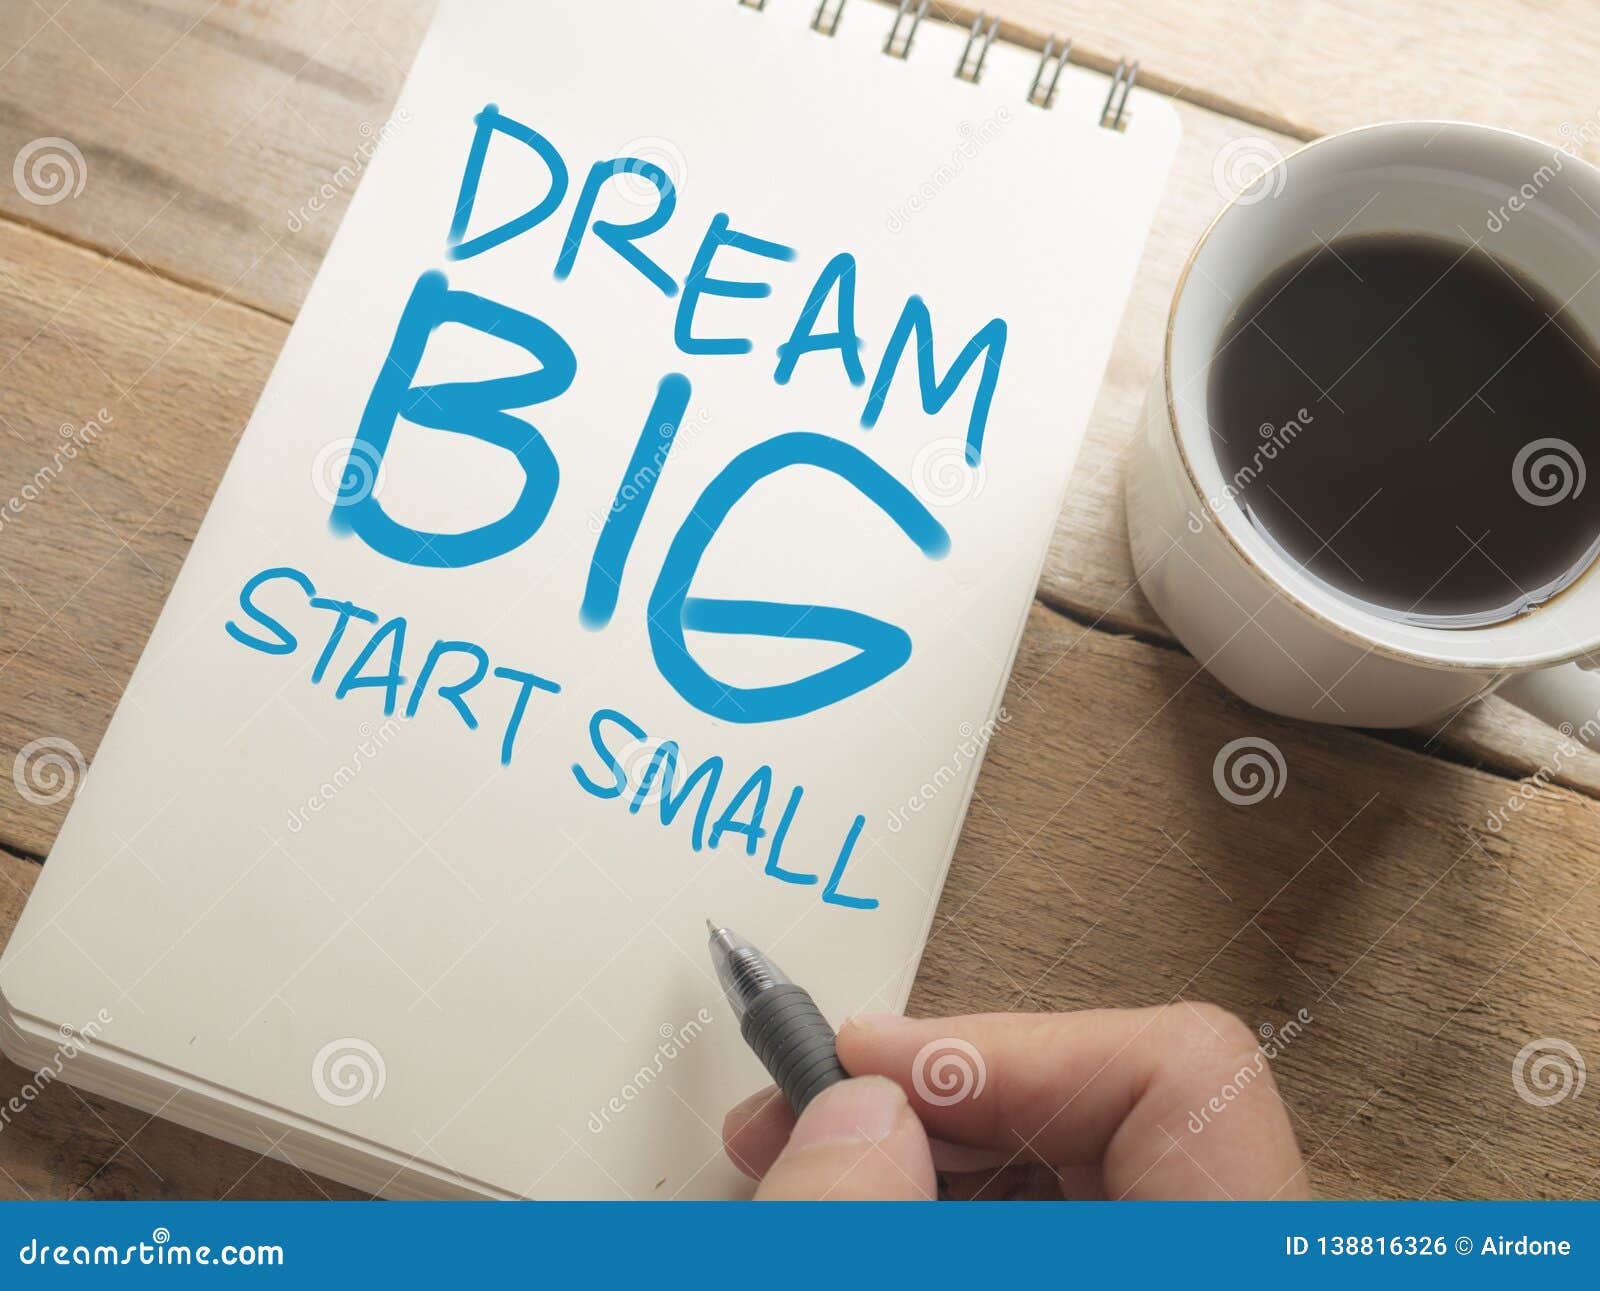 Dream Big Start Small, Motivational Words Quotes Concept Stock Photo - Image Of Motivate, Analysis: 138816326